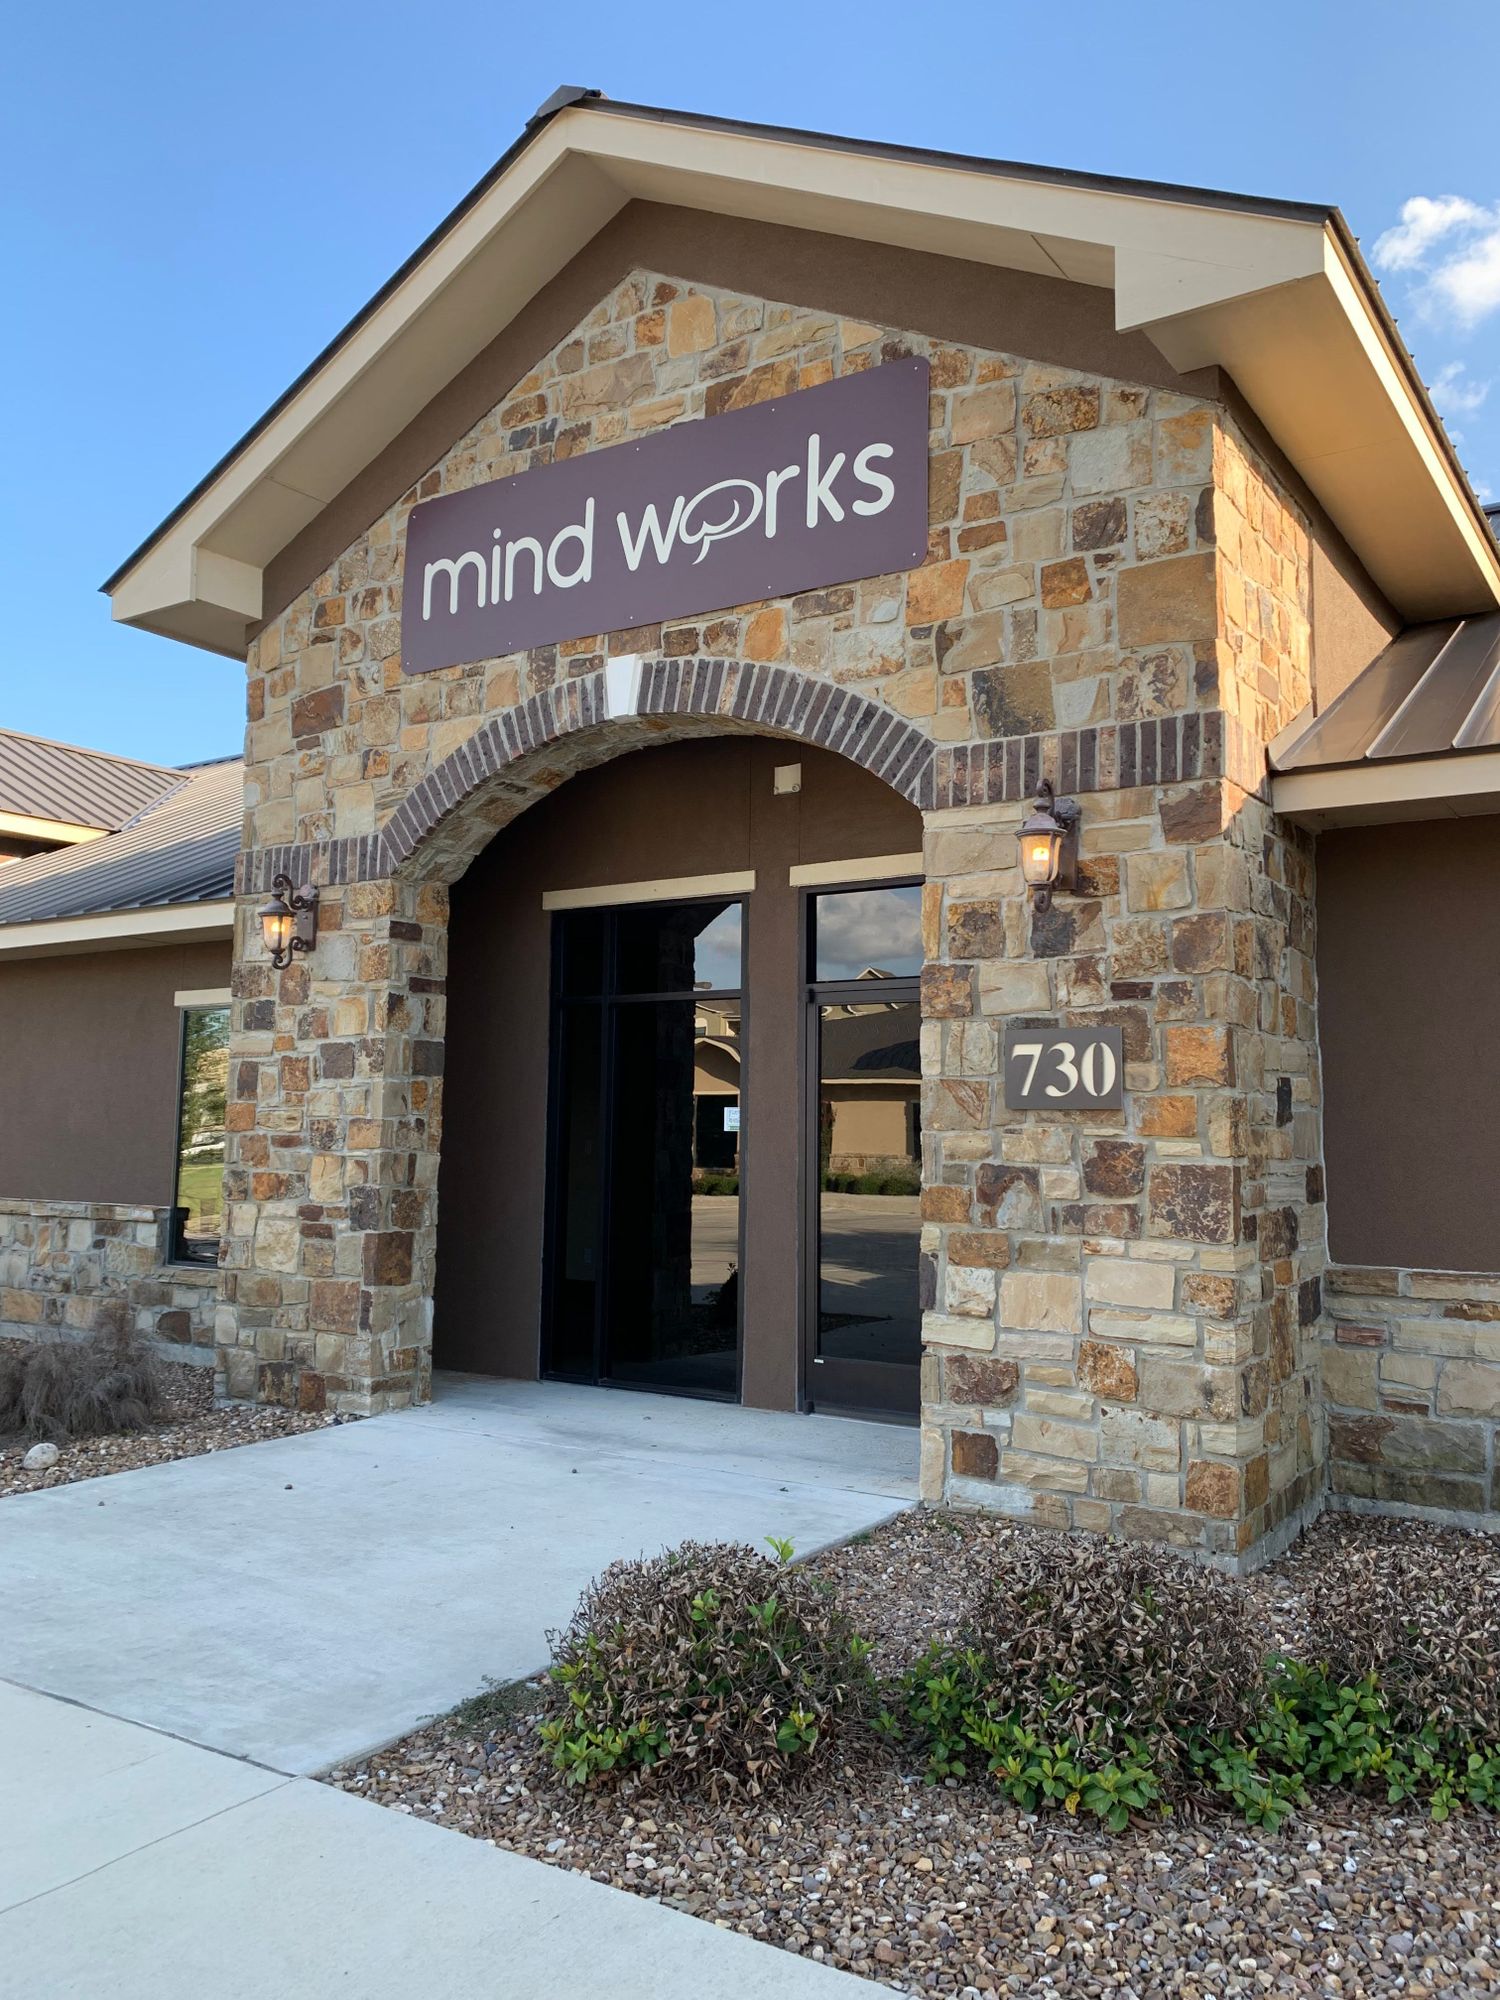 Gallery Photo of Mind Works New Braunfels